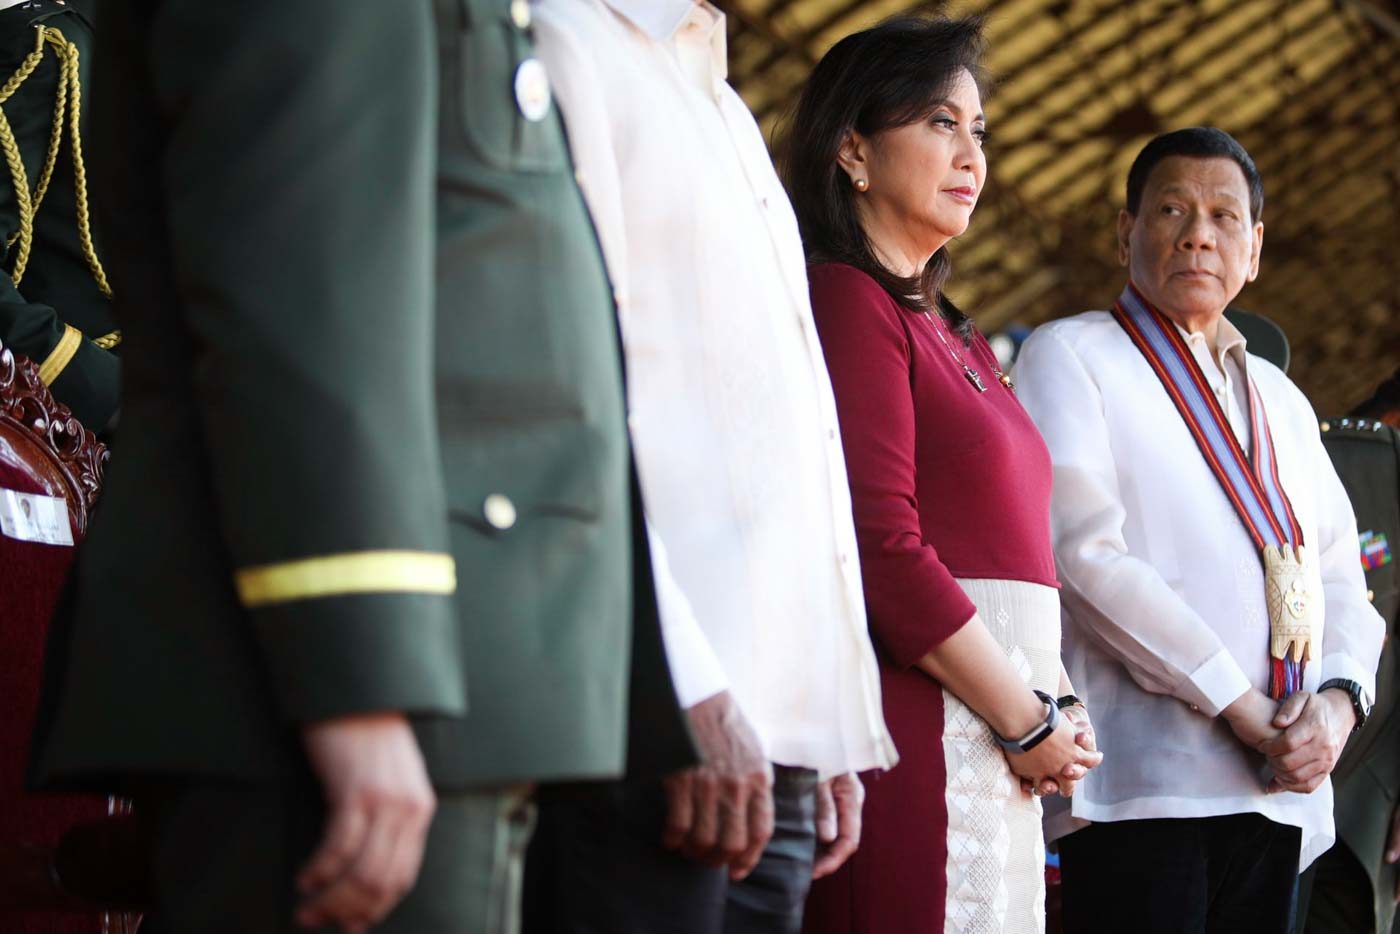 ‘Not time to keep score’: Robredo focuses on frontliners, not politics